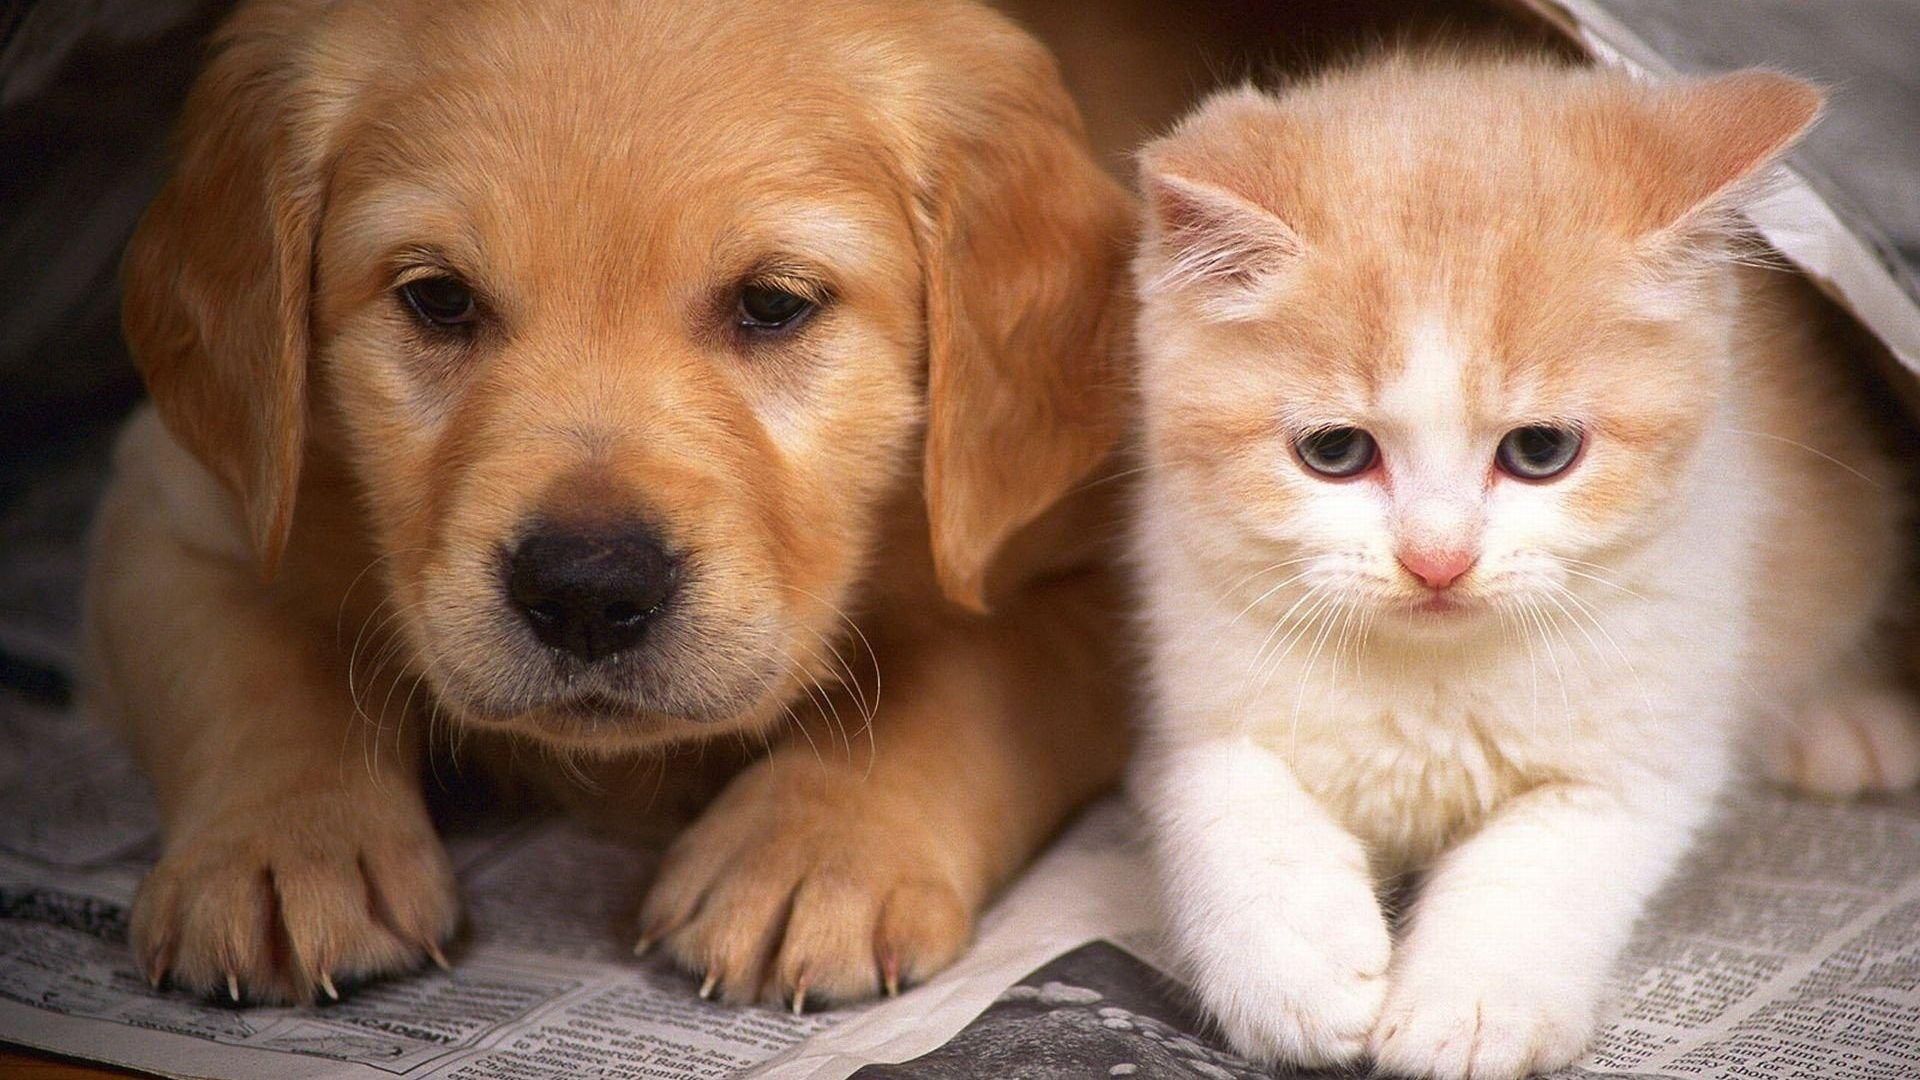 Download Kitten And Puppy Wallpaper High Definition Is Cool Wallpaper